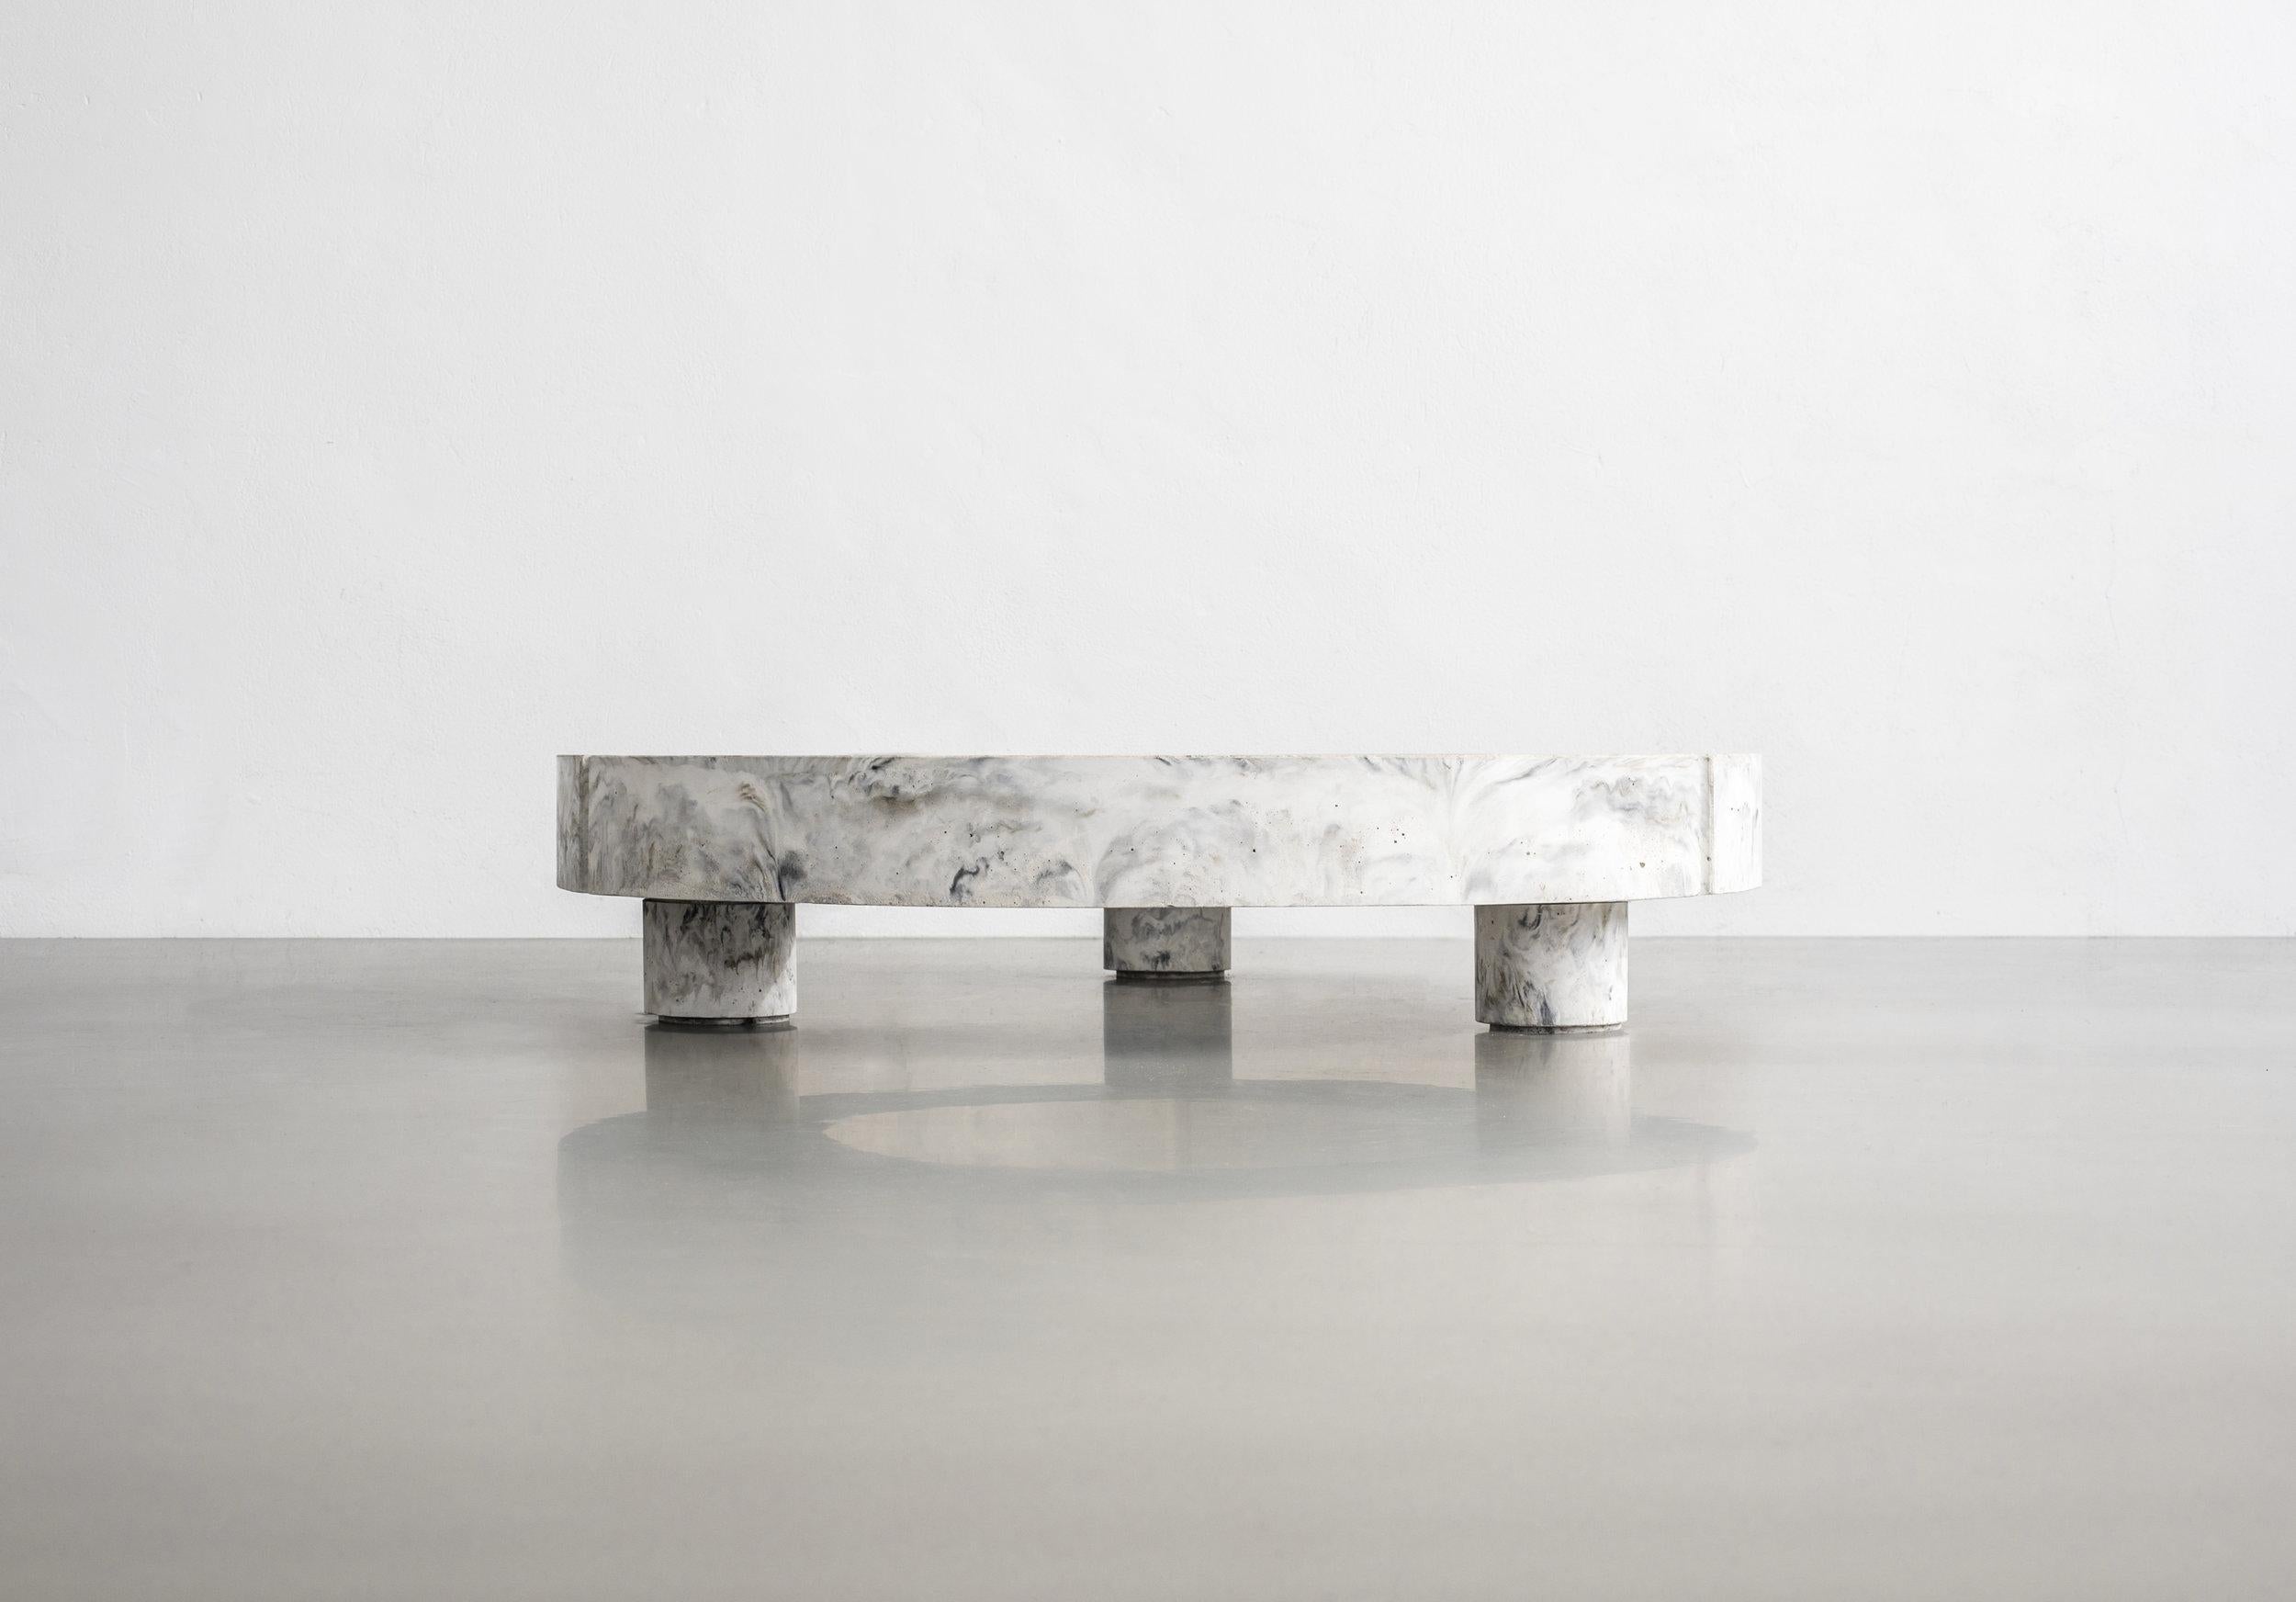 Gestalt coffee table - Signed by Frederik Bogaerts and Jochen Sablon
Materials: Pigmented concrete, black/moss marbled
Dimensions: H 22 cm Ø 100 cm
Limited edition of 25
Signed and numbered.

Gesralt low table.

Gesralt is a barrel full of